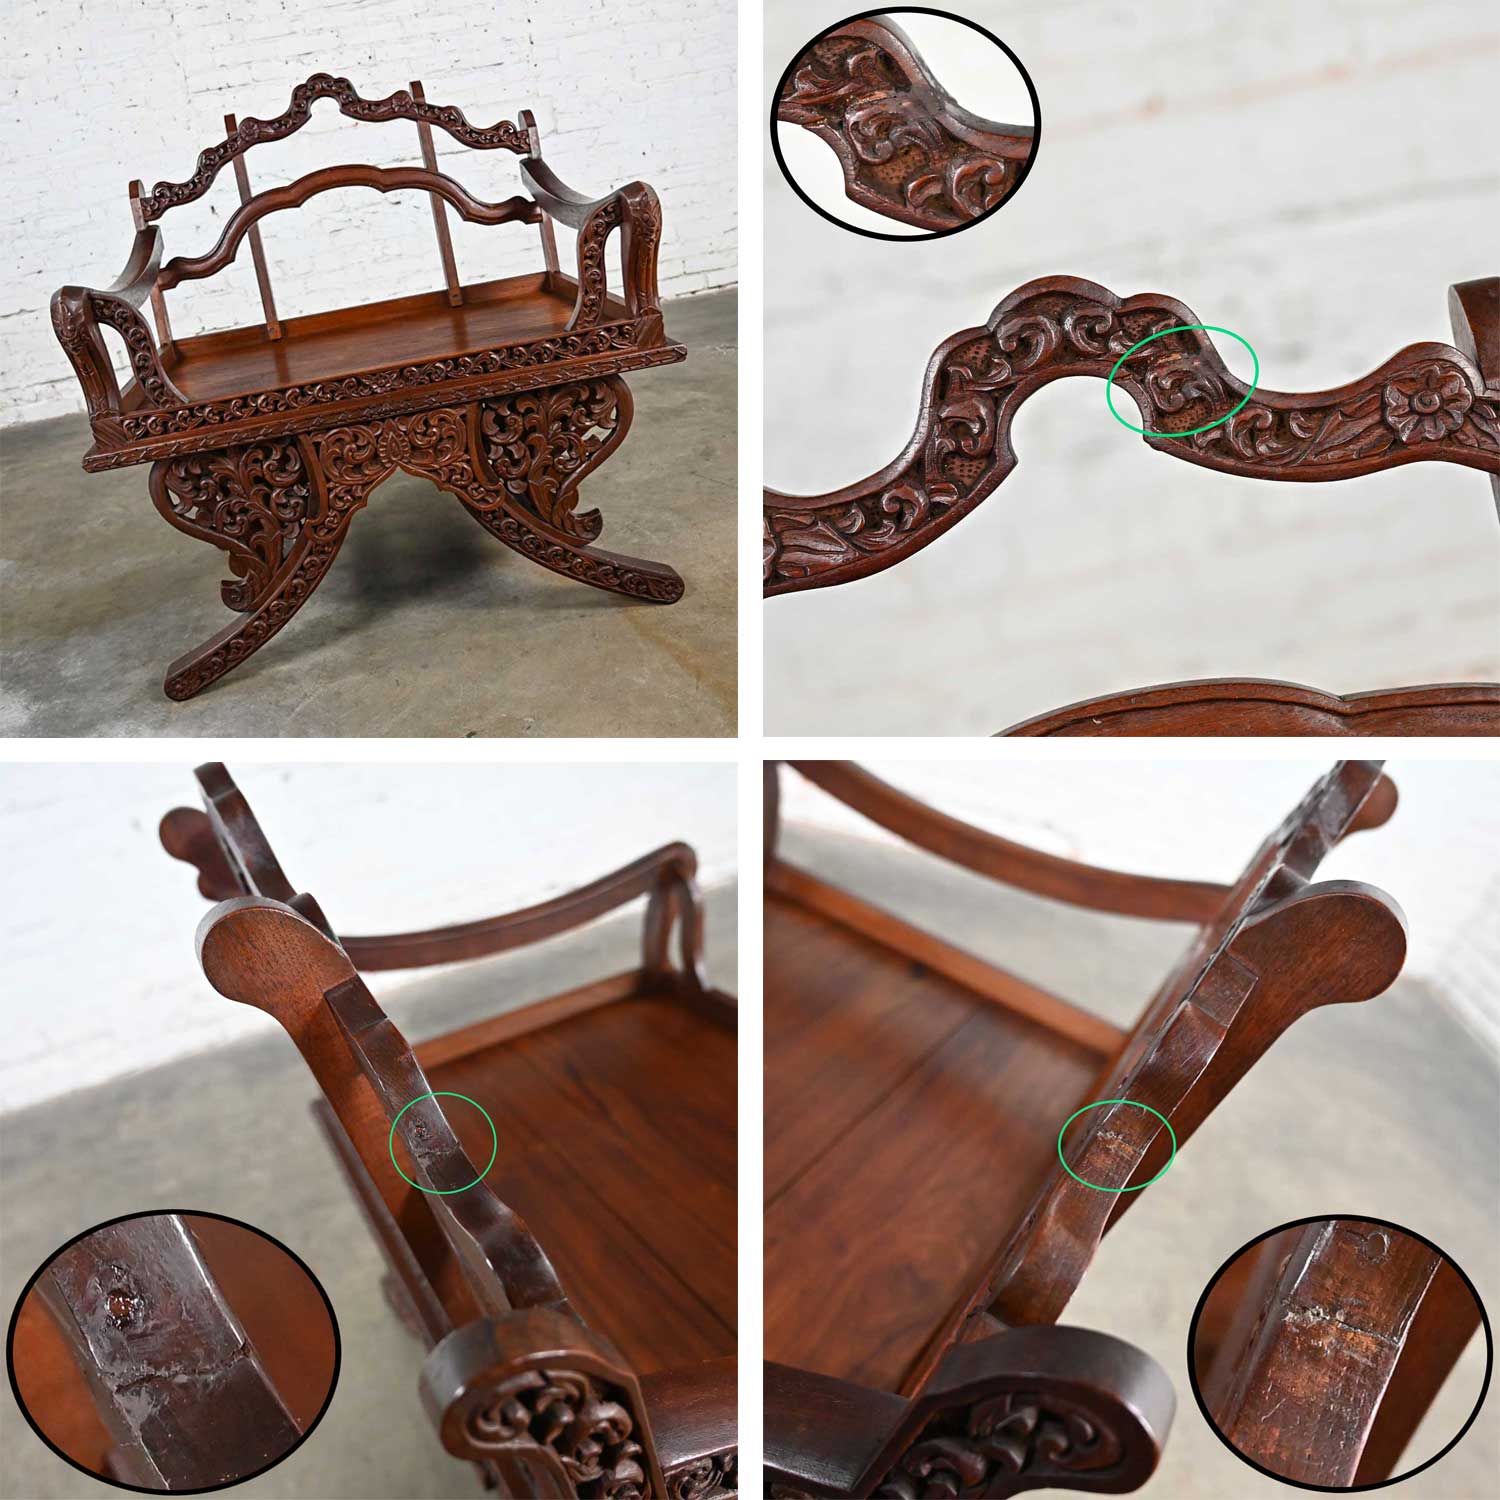 Vintage Chinoiserie Hand Carved Rosewood Howdah or Elephant Saddle Chair from Bangkok Thailand